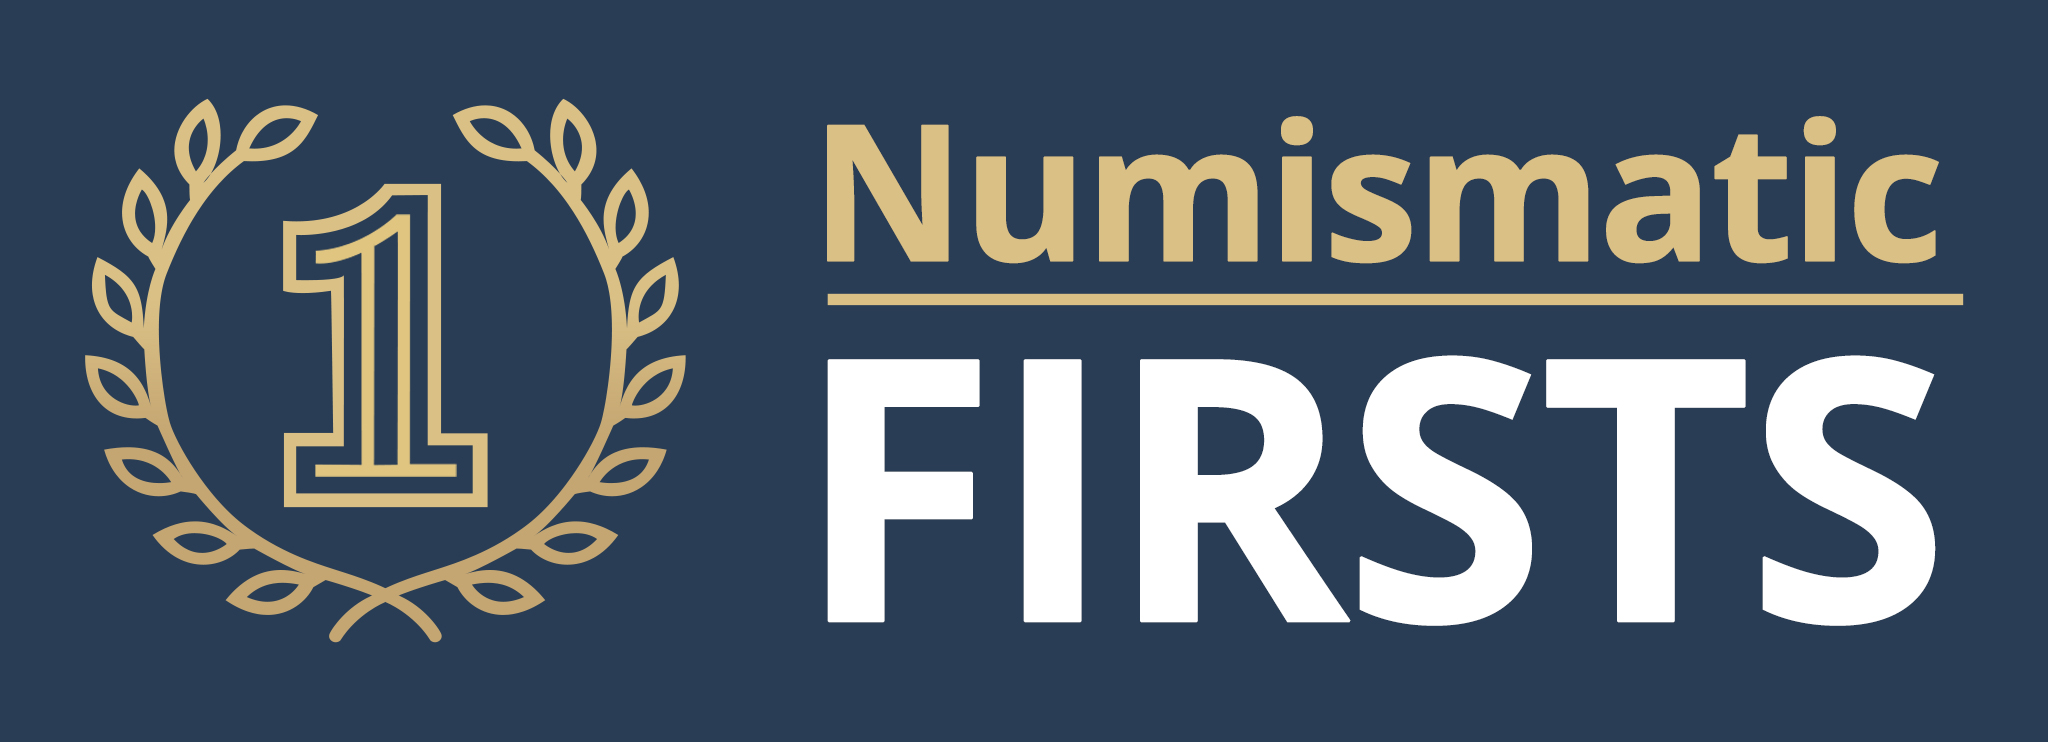 Discover 9 Major Numismatic Firsts! - Littleton Coin Company Blog